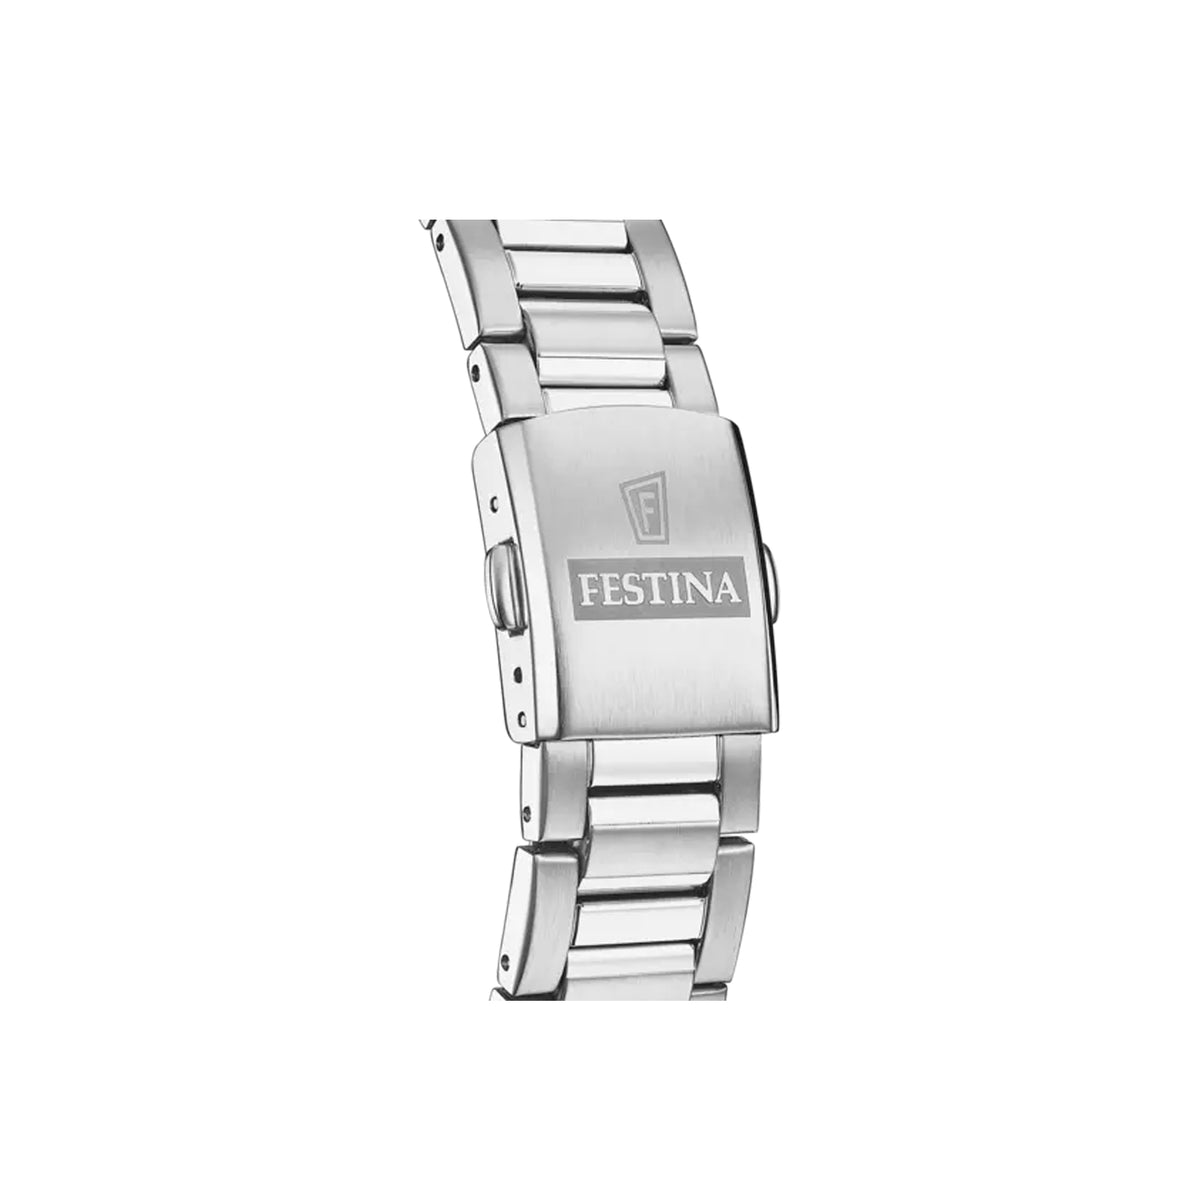 Festina For Stainless Watch Time Steel Depot Automatic – F20630/4 Men Strap Silver